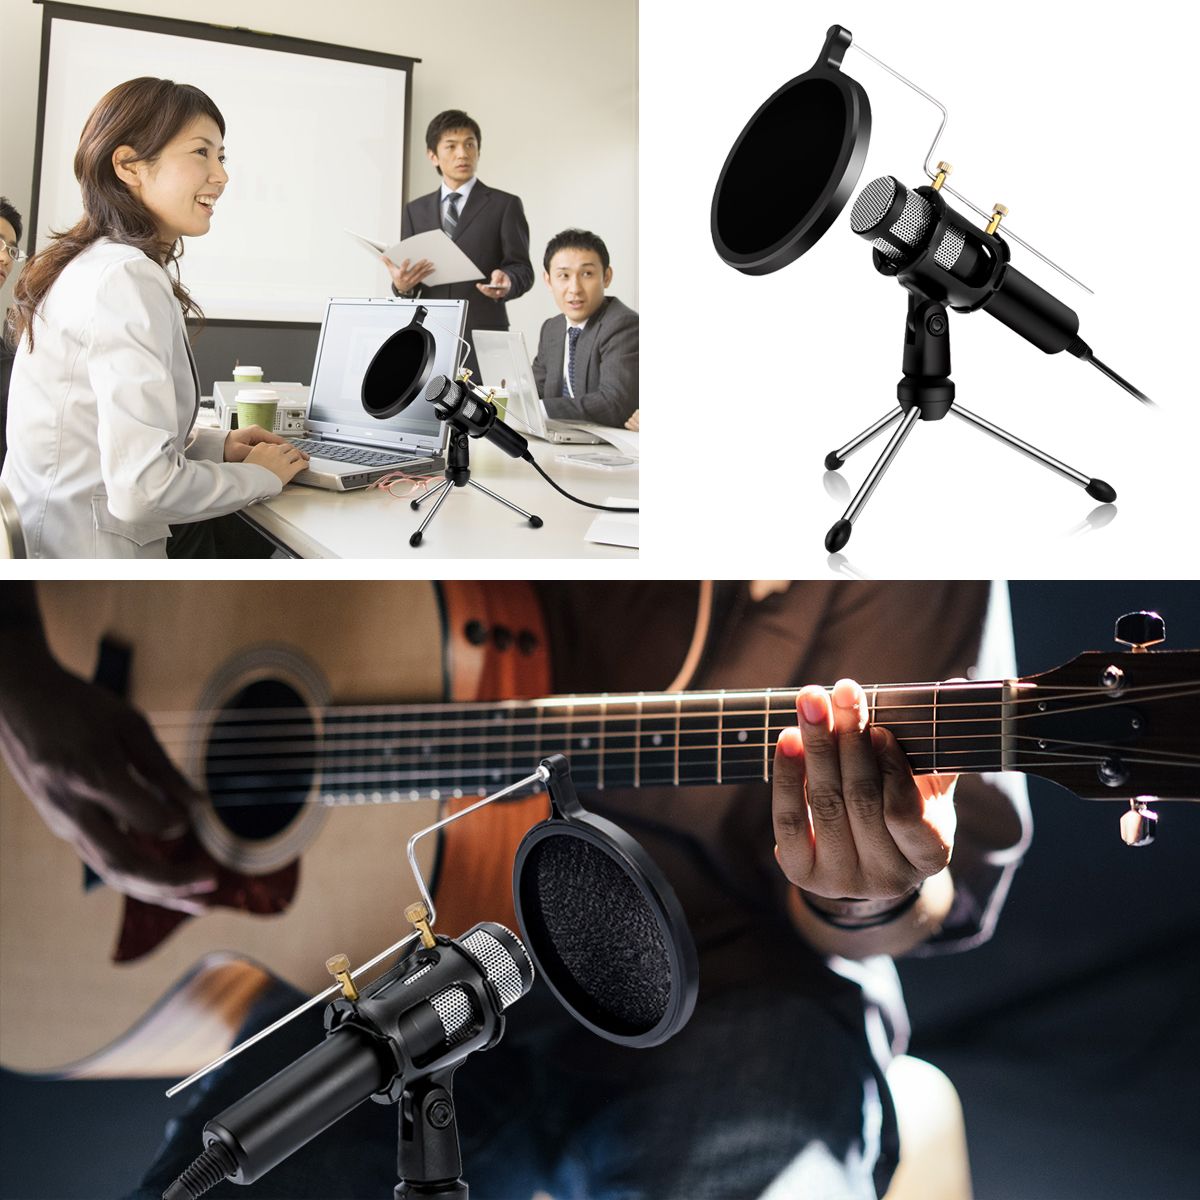 USB-Professional-Home-Studio-Condenser-Microphone-for-Live-Broadcast-Podcast-Recording-PC-Laptop-for-1486823